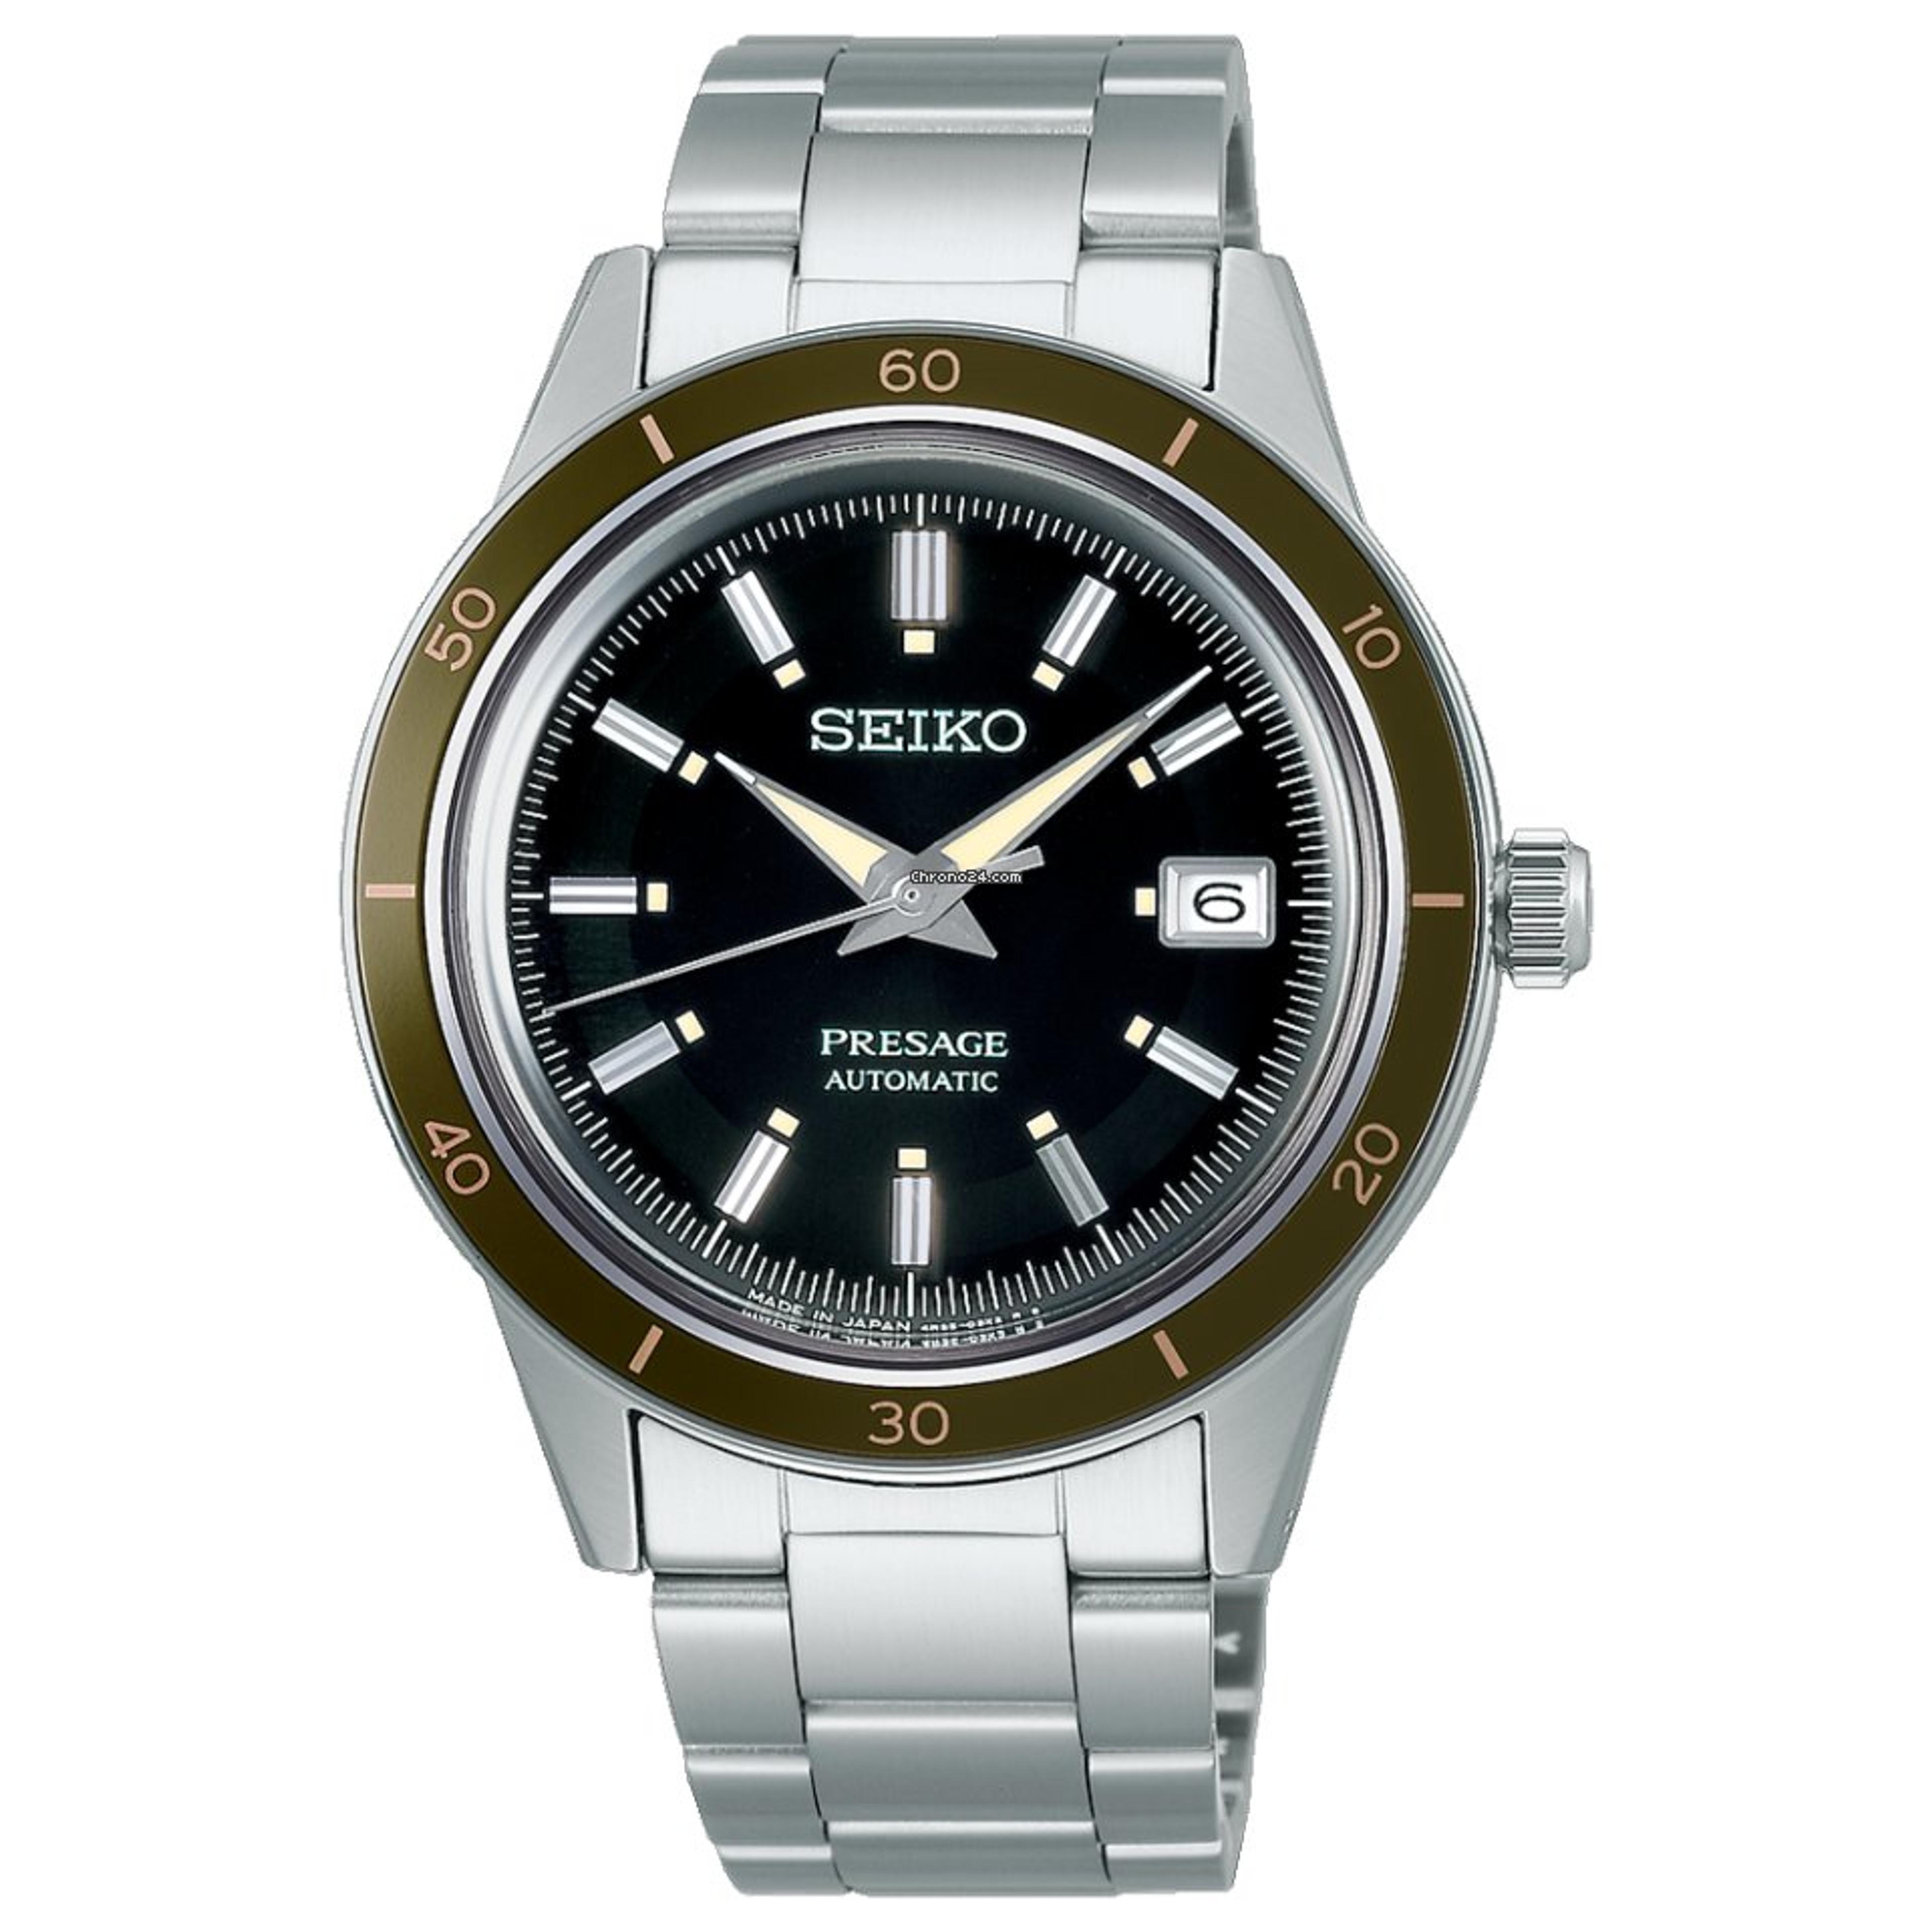 ⁣Seiko Presage Automatic 40.8mm - Style60's Series SRPG07 ( NEW... for $513 for sale from a Seller on Chrono24